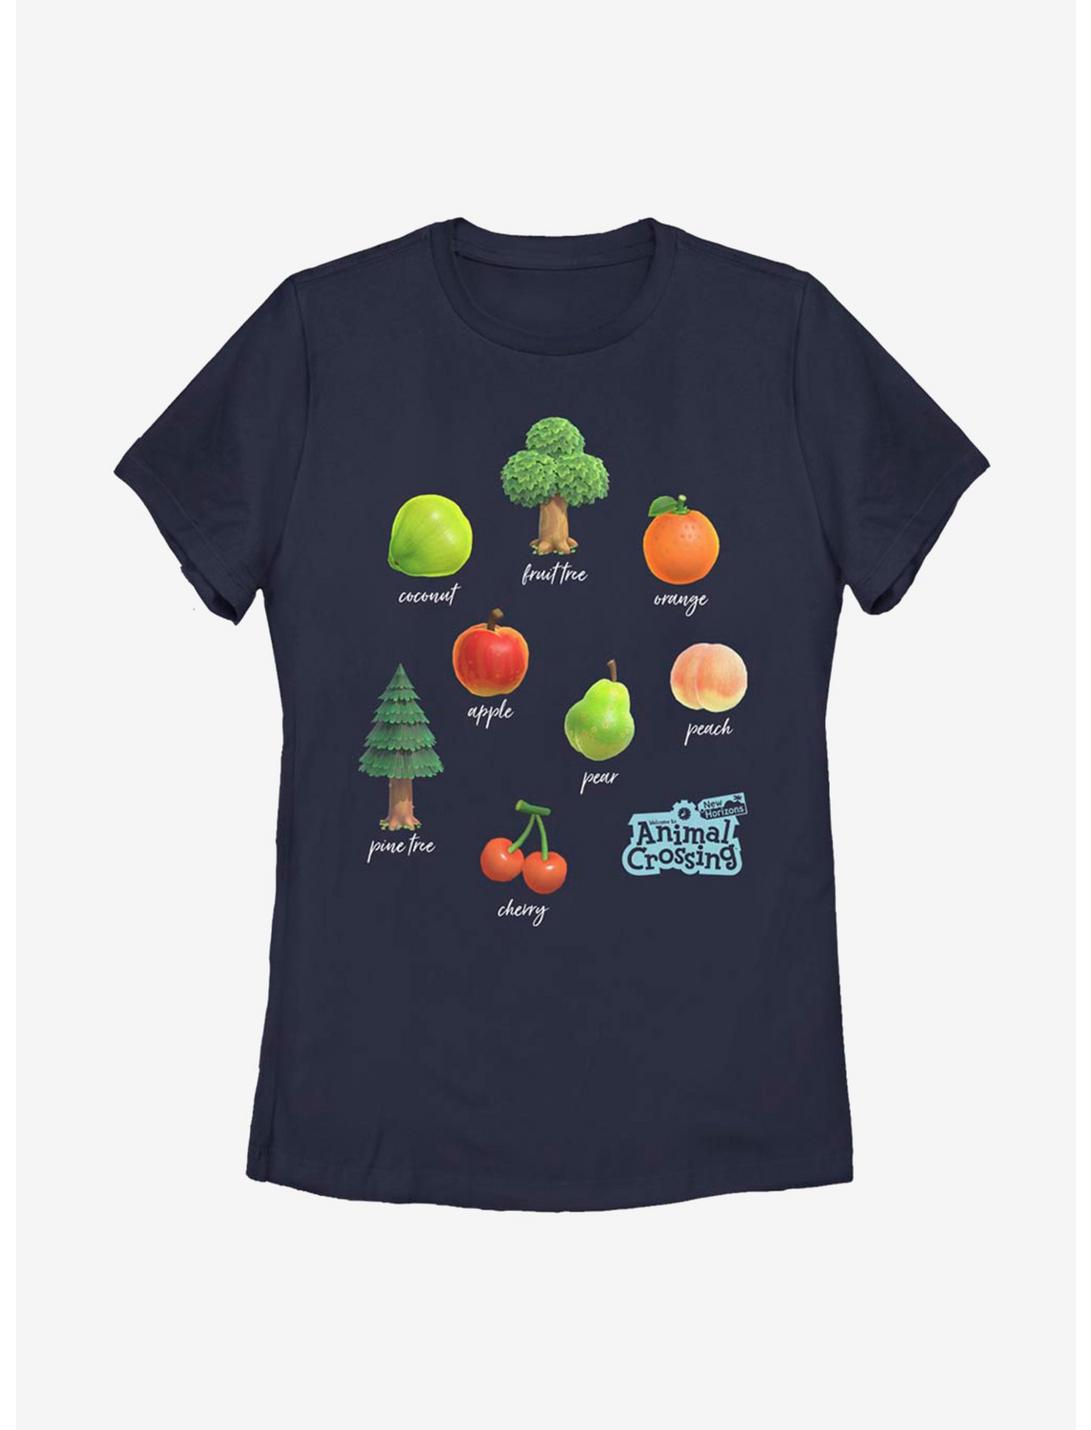 Animal Crossing Fruit and Trees Womens T-Shirt, NAVY, hi-res